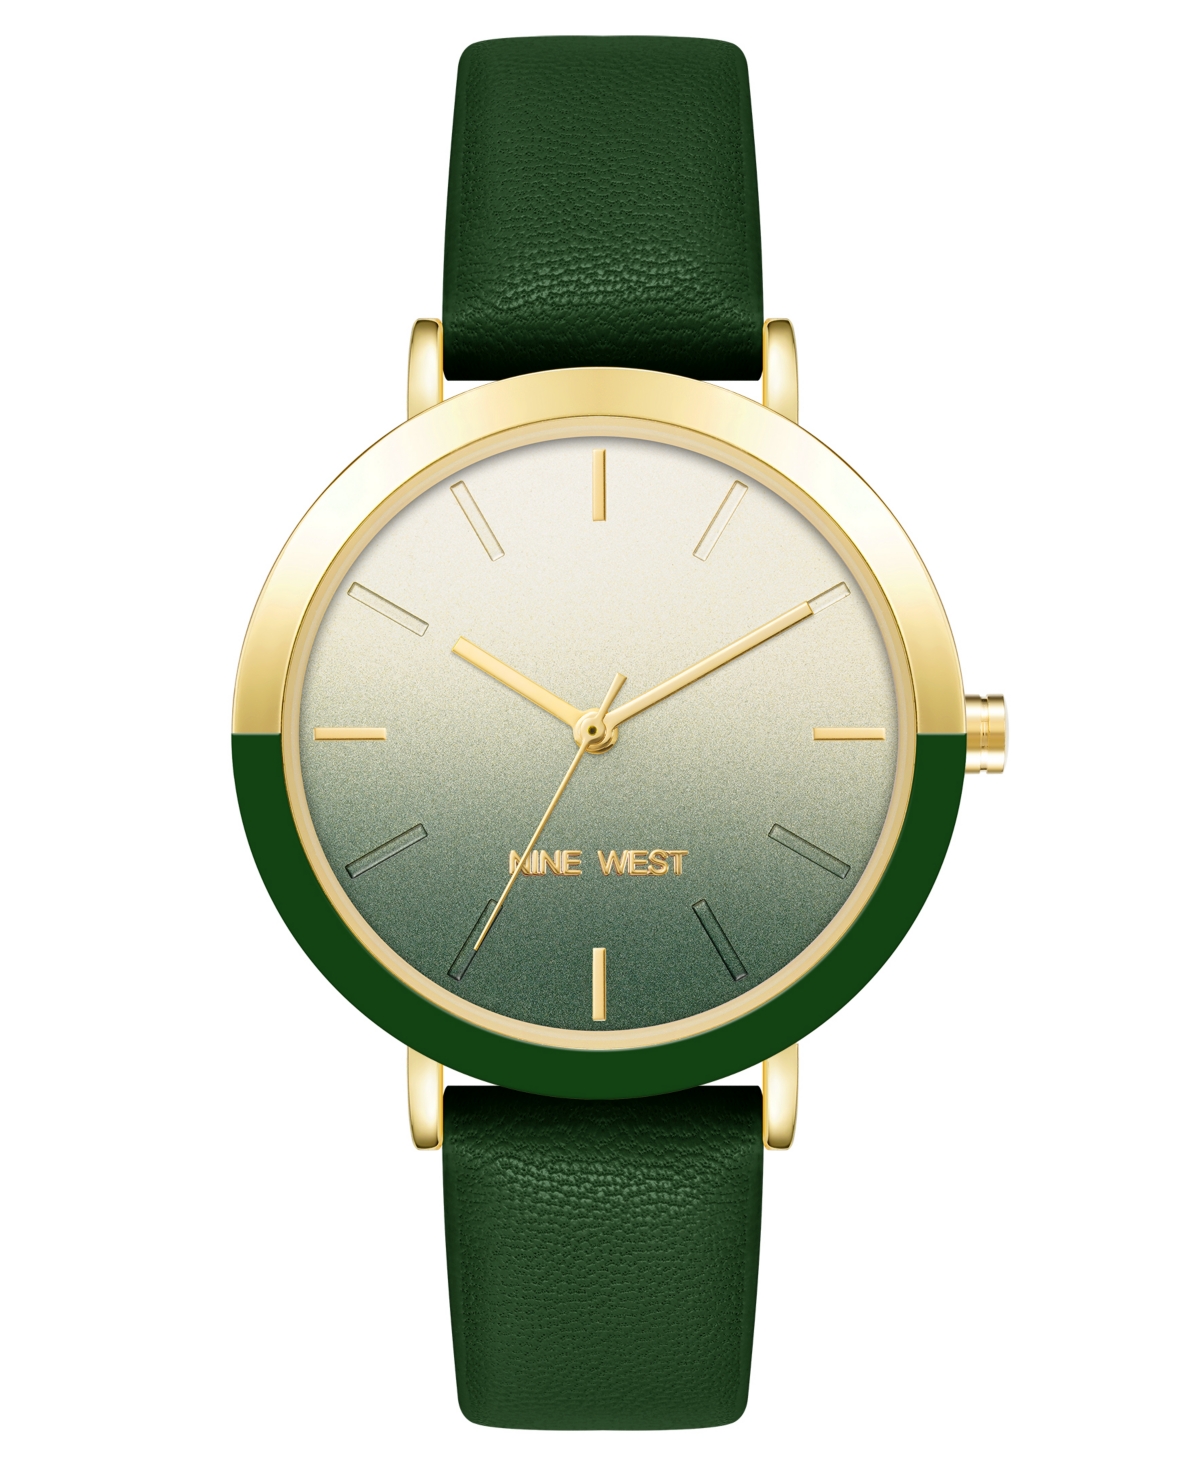 Nine West Women's Quartz Green Faux Leather Band Watch, 36mm In Green,gold-tone